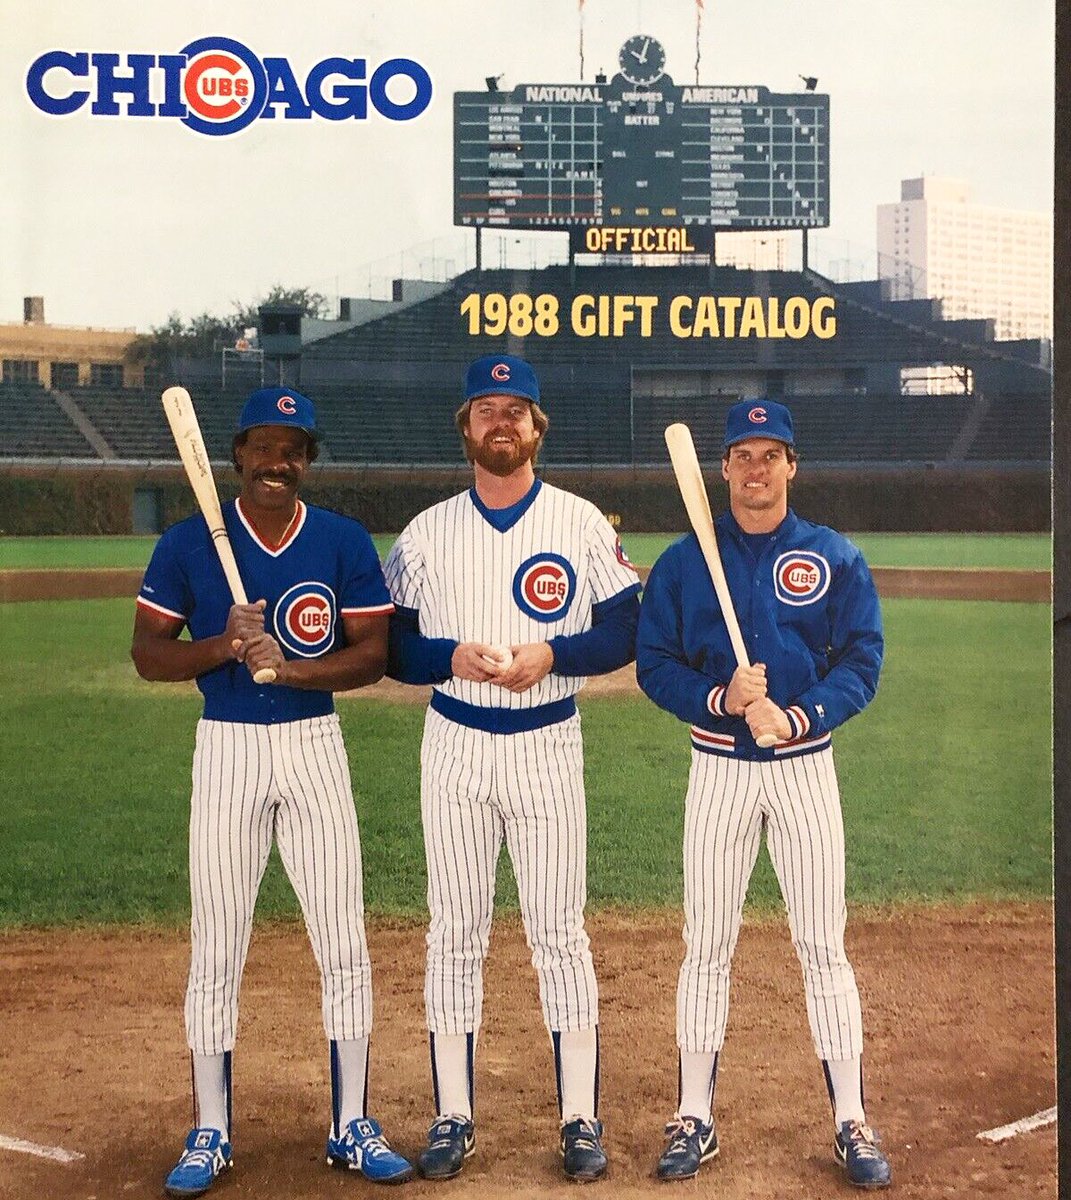 Hell Of A Hall Of Fame Trio, Huh?

#ChicagoHistory ☑️